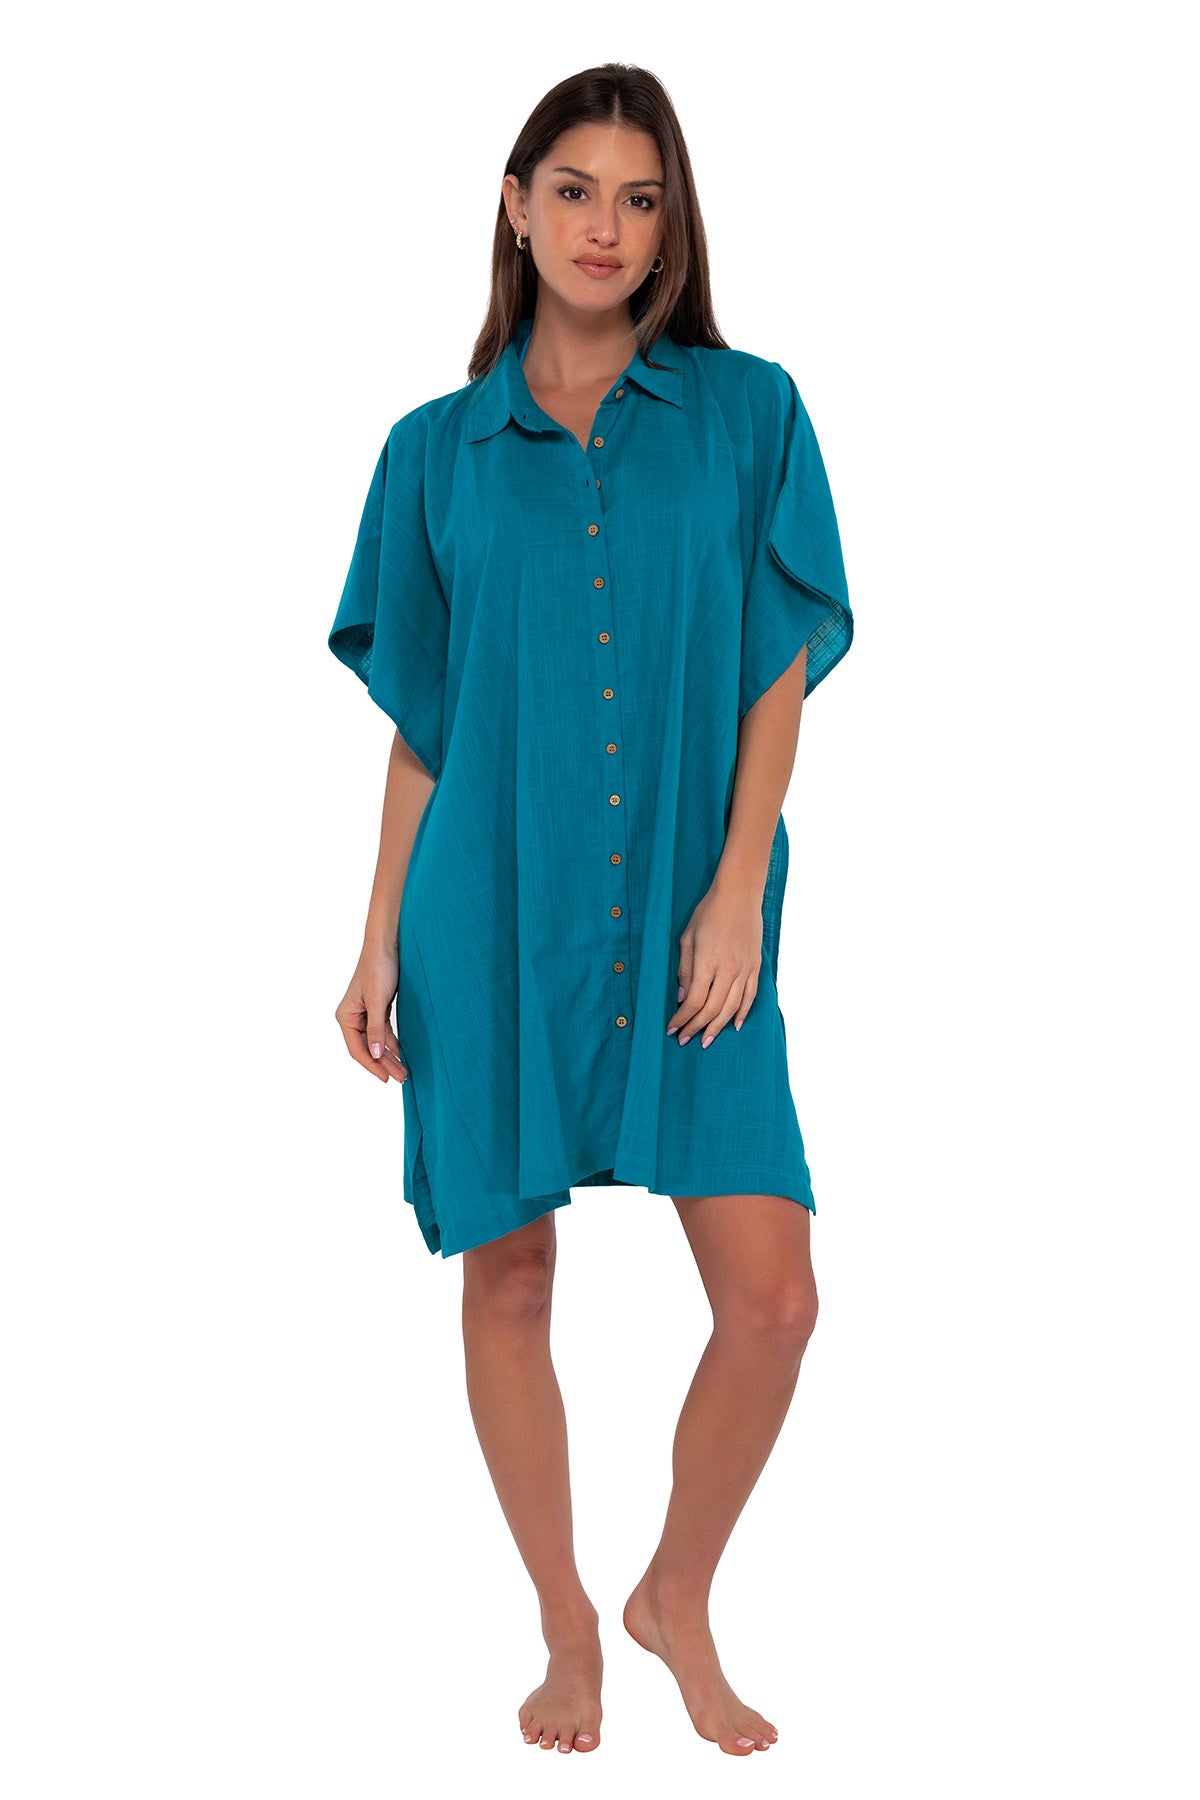 Front pose #1 of Gigi wearing Sunsets Avalon Teal Shore Thing Tunic